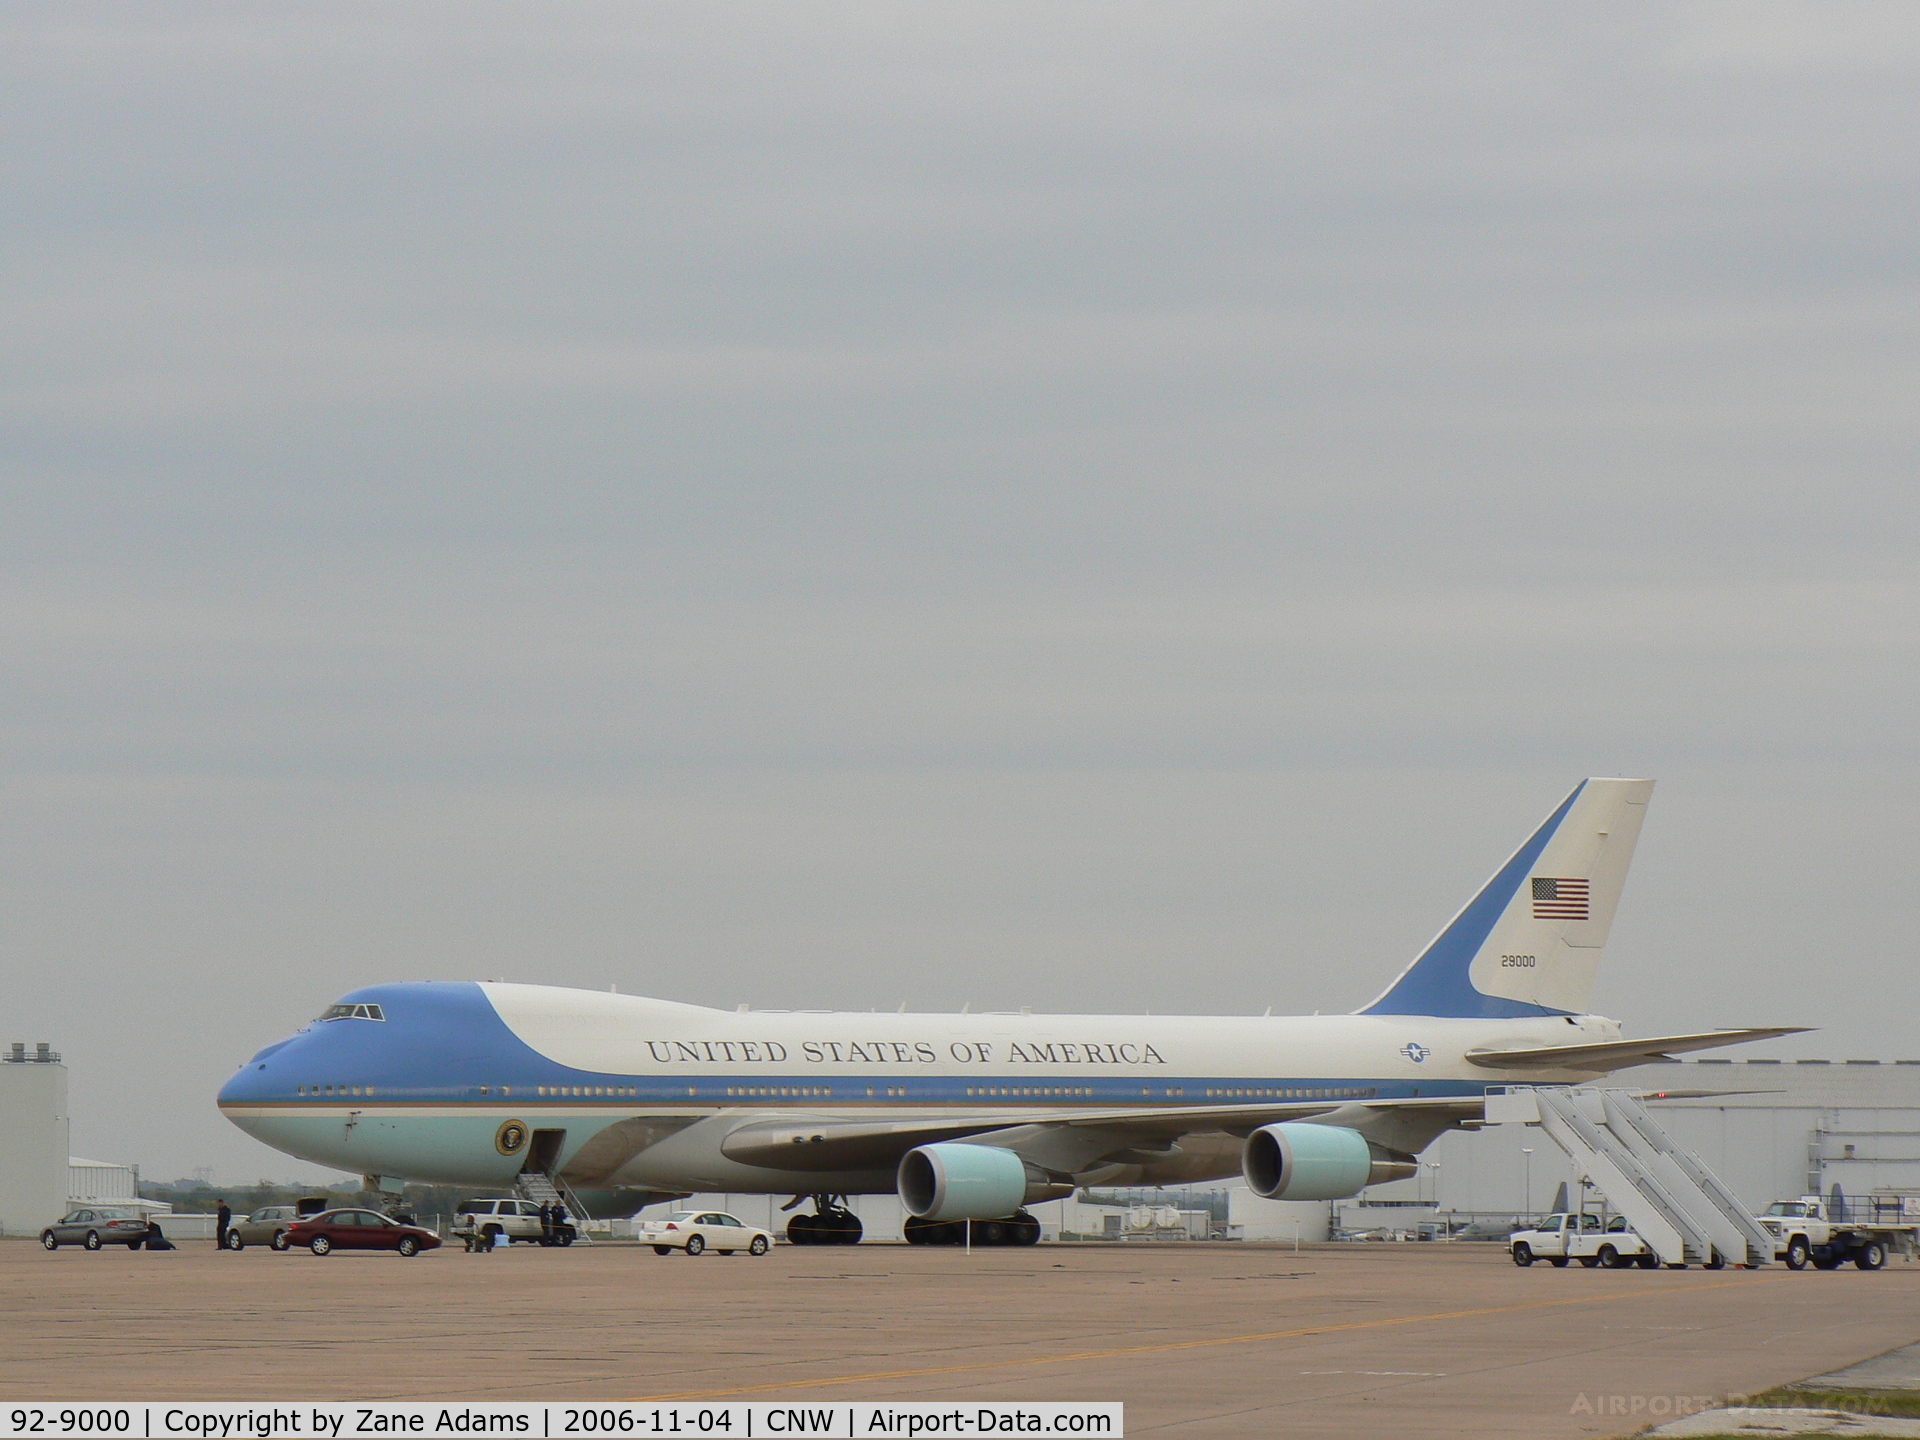 92-9000, 1987 Boeing VC-25A C/N 23825, Air Force One at it's Texas base